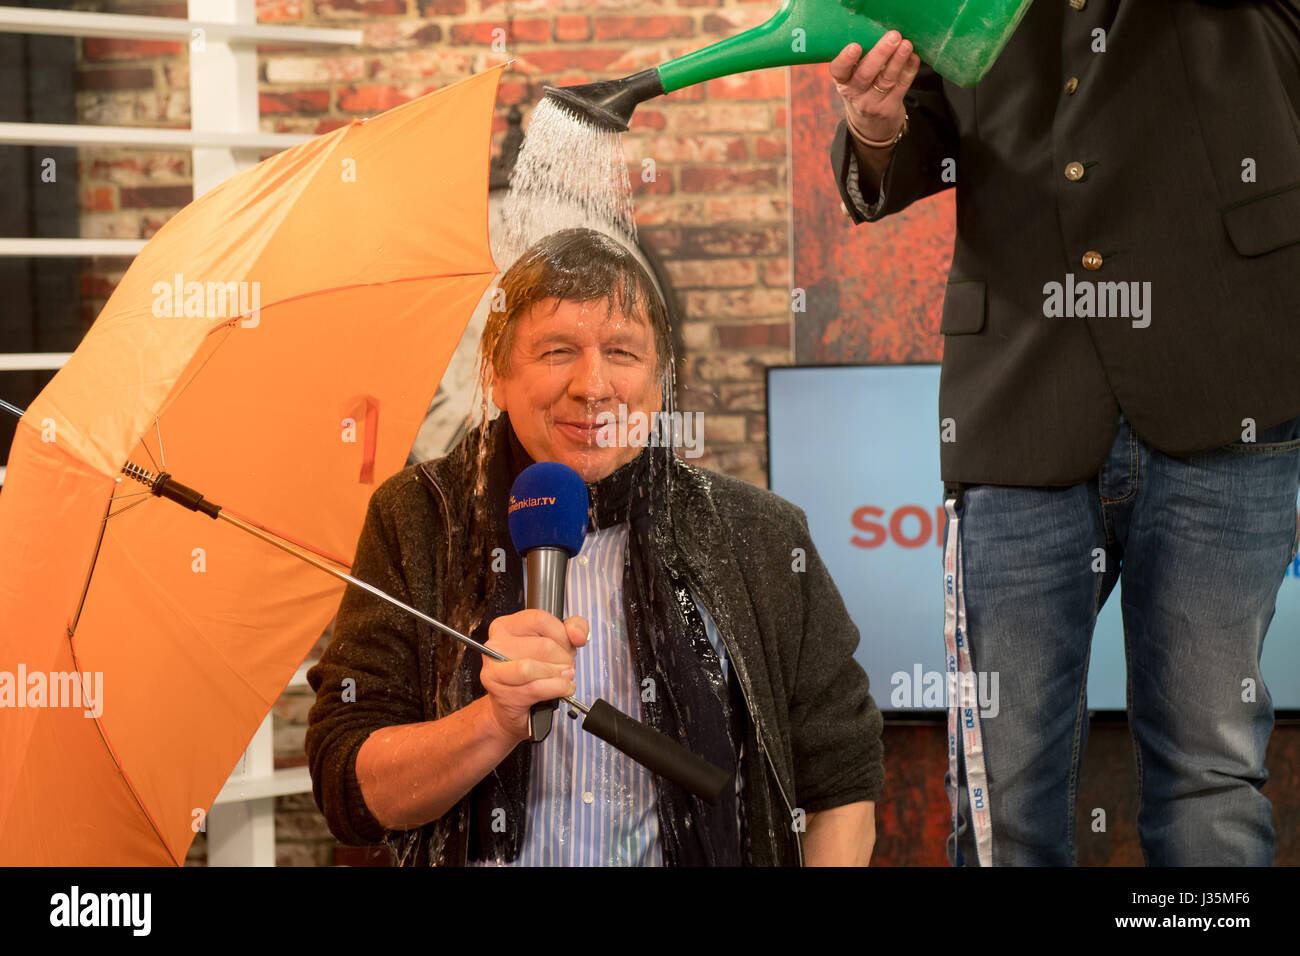 Munich, Germany. 03rd May, 2017. Andreas Lambeck (R), CEO of the sonnenklar.TV TV station, uses a watering can to pour water on the head of meteorologist Jorg Kachelmann at the TV studio of the sonnenklar.TV station in Munich, Germany, 03 May 2017. On 04 May Kachelmann will present the 'Kachelmannwetter' show, which will air once monthly. Photo: Tobias Hase/dpa/Alamy Live News Stock Photo